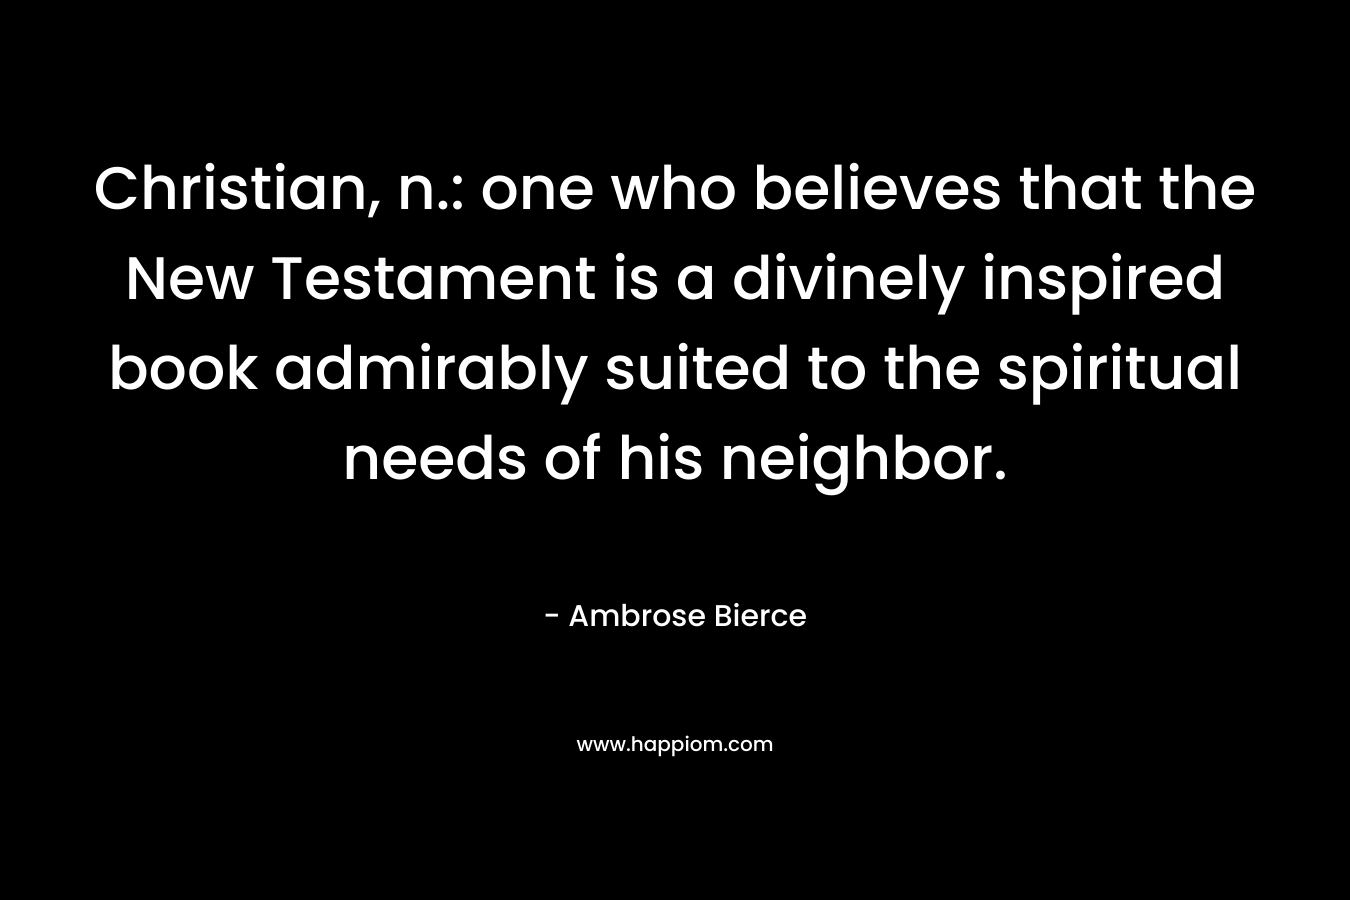 Christian, n.: one who believes that the New Testament is a divinely inspired book admirably suited to the spiritual needs of his neighbor.